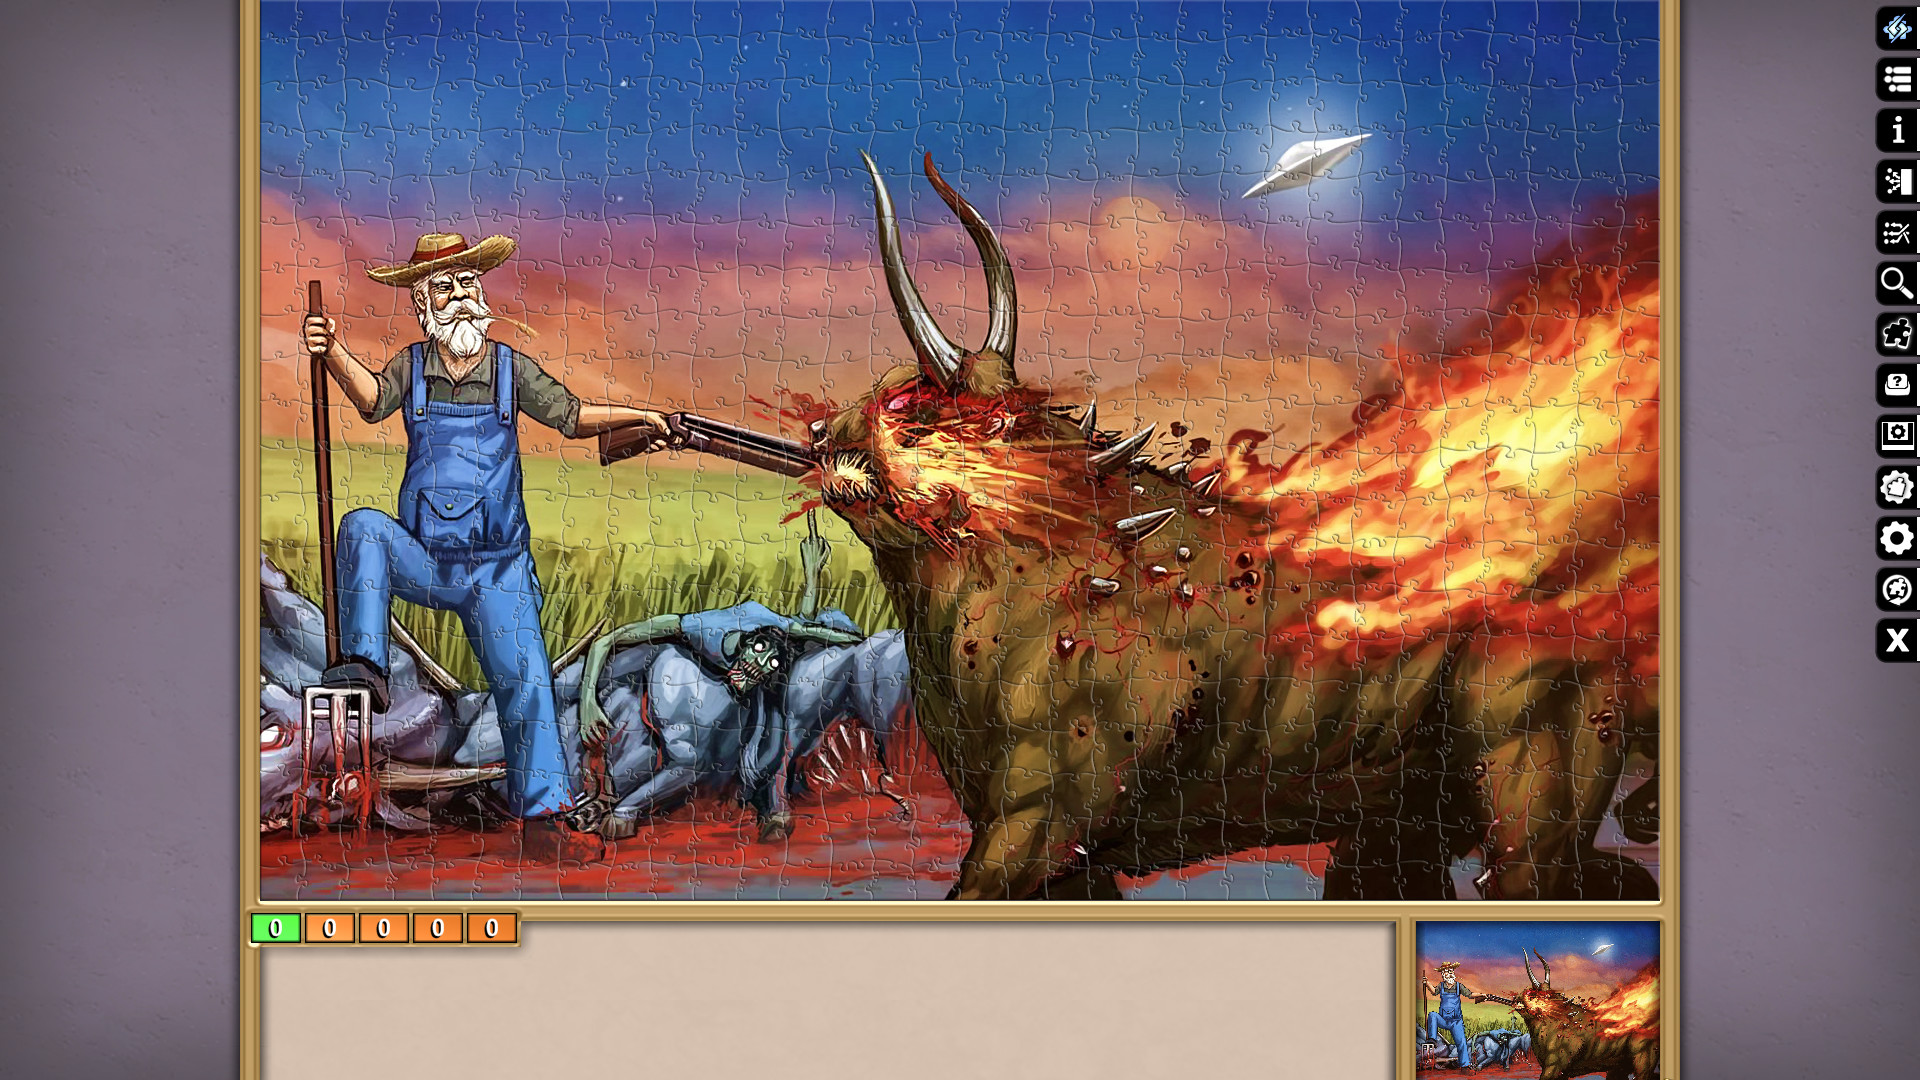 Jigsaw Puzzle Pack - Pixel Puzzles Ultimate: T.C.O.T.C screenshot